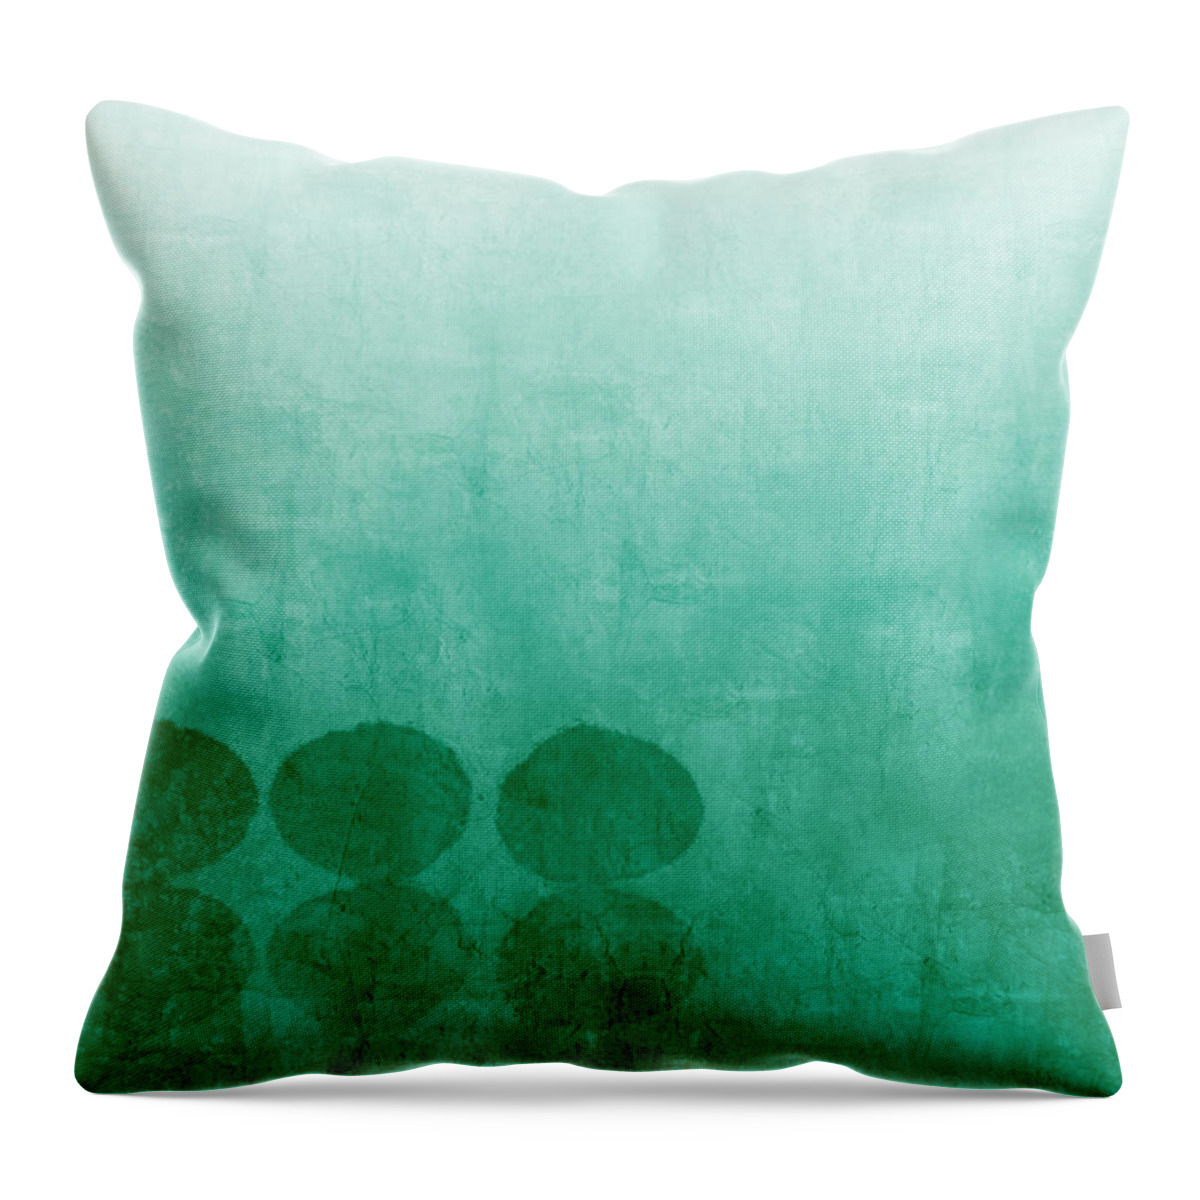 Abstract Throw Pillow featuring the painting Tranquility #1 by Linda Woods